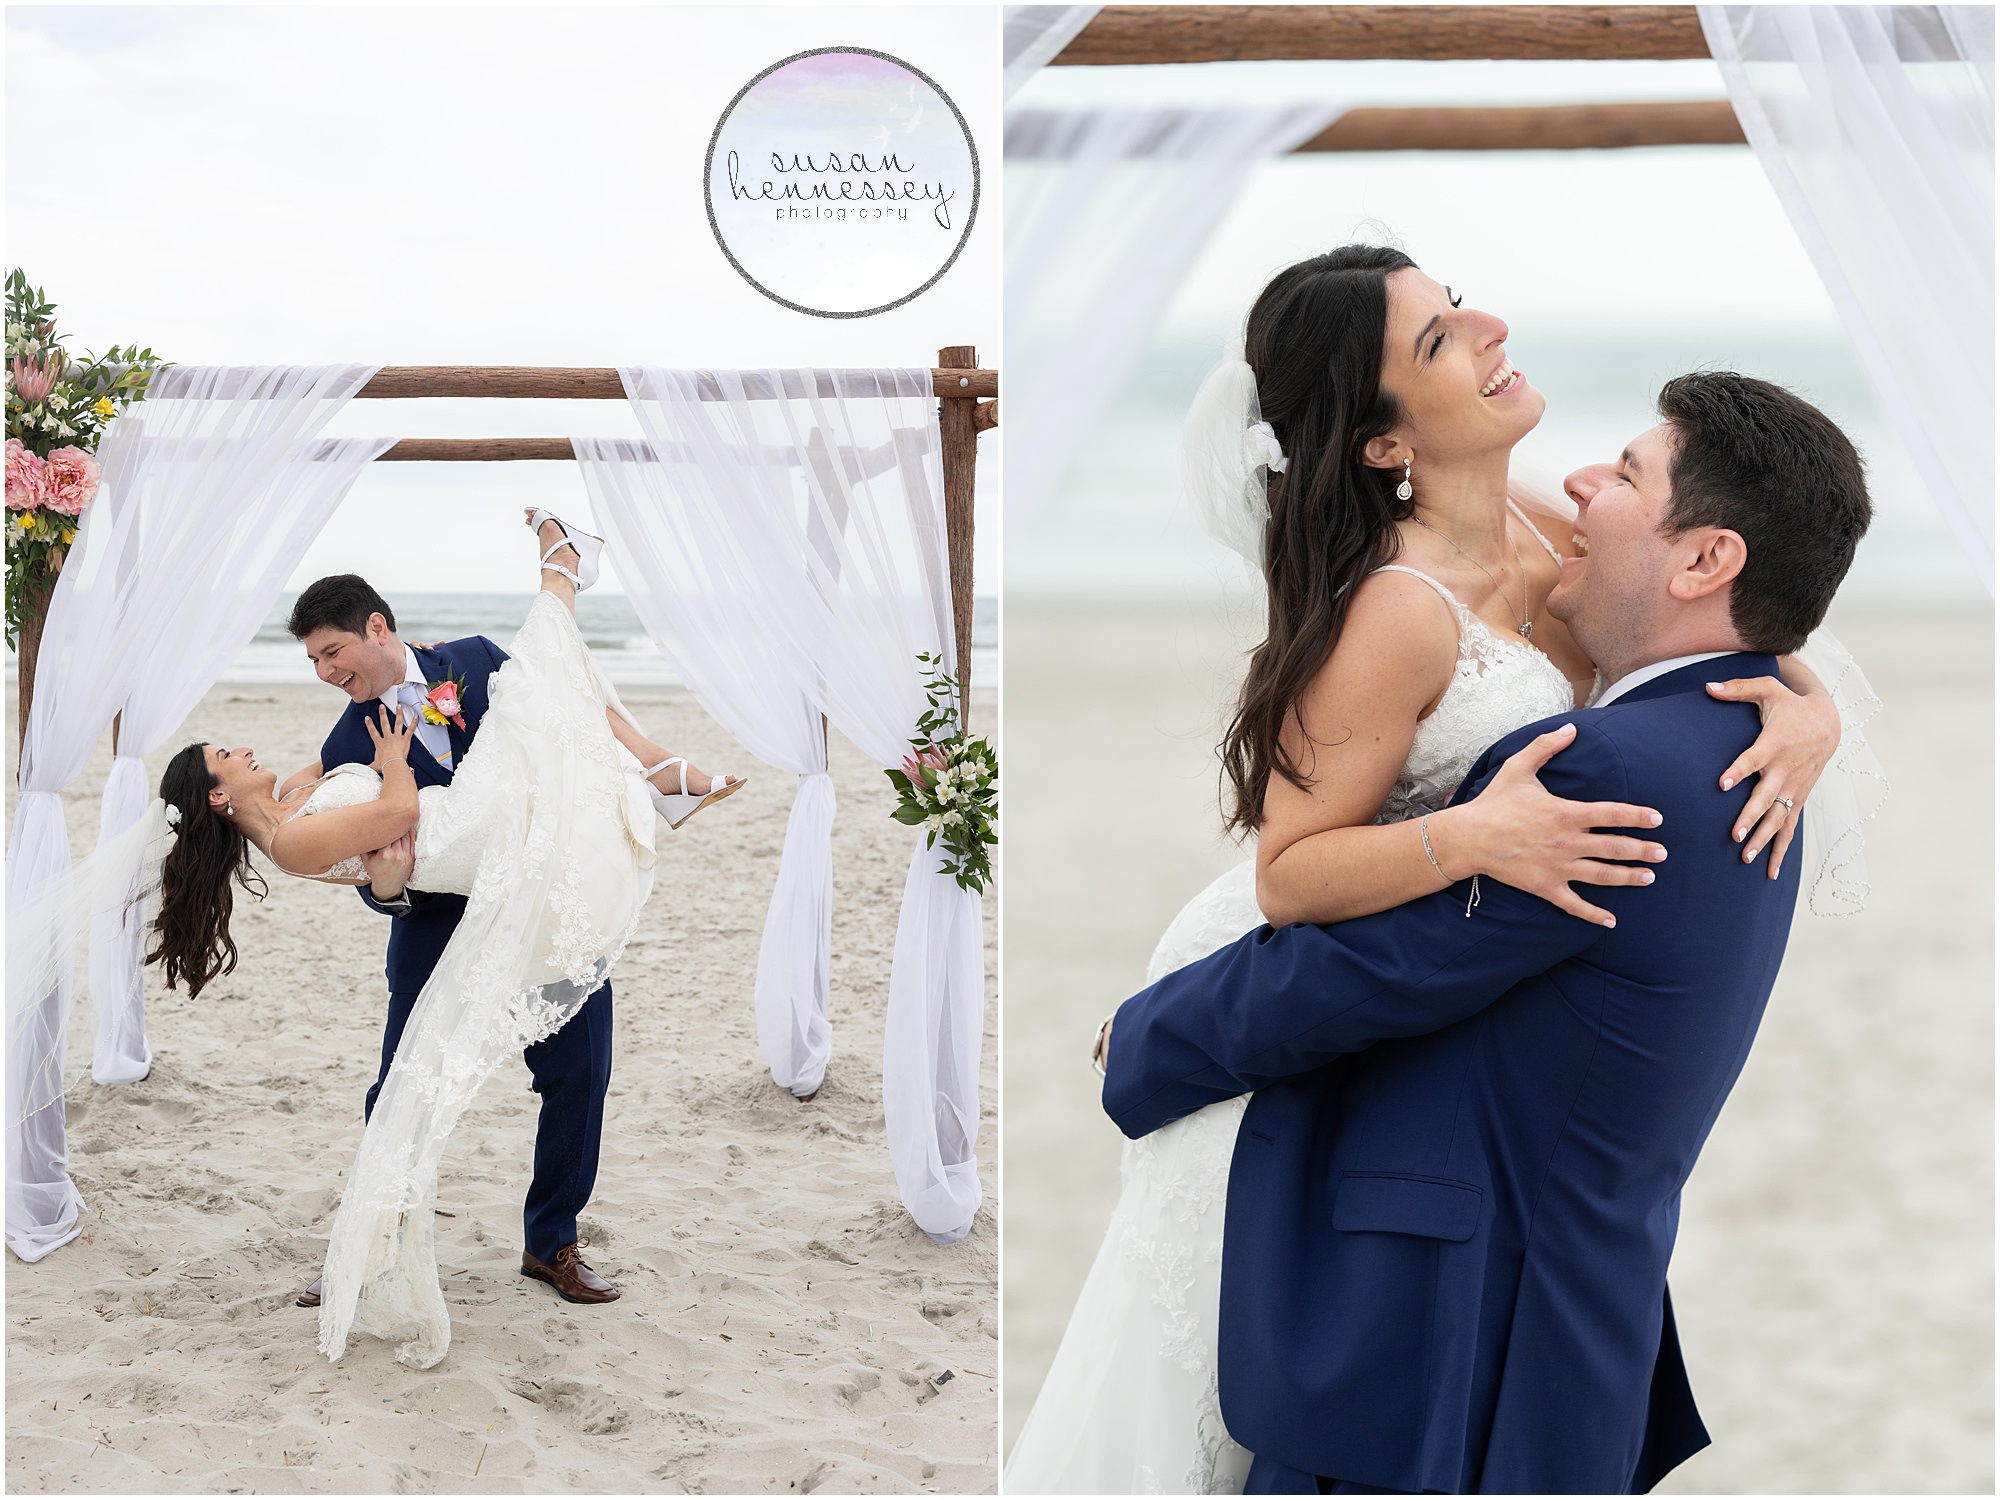 Happy and romantic portraits of bride and groom at ICONA Avalon wedding